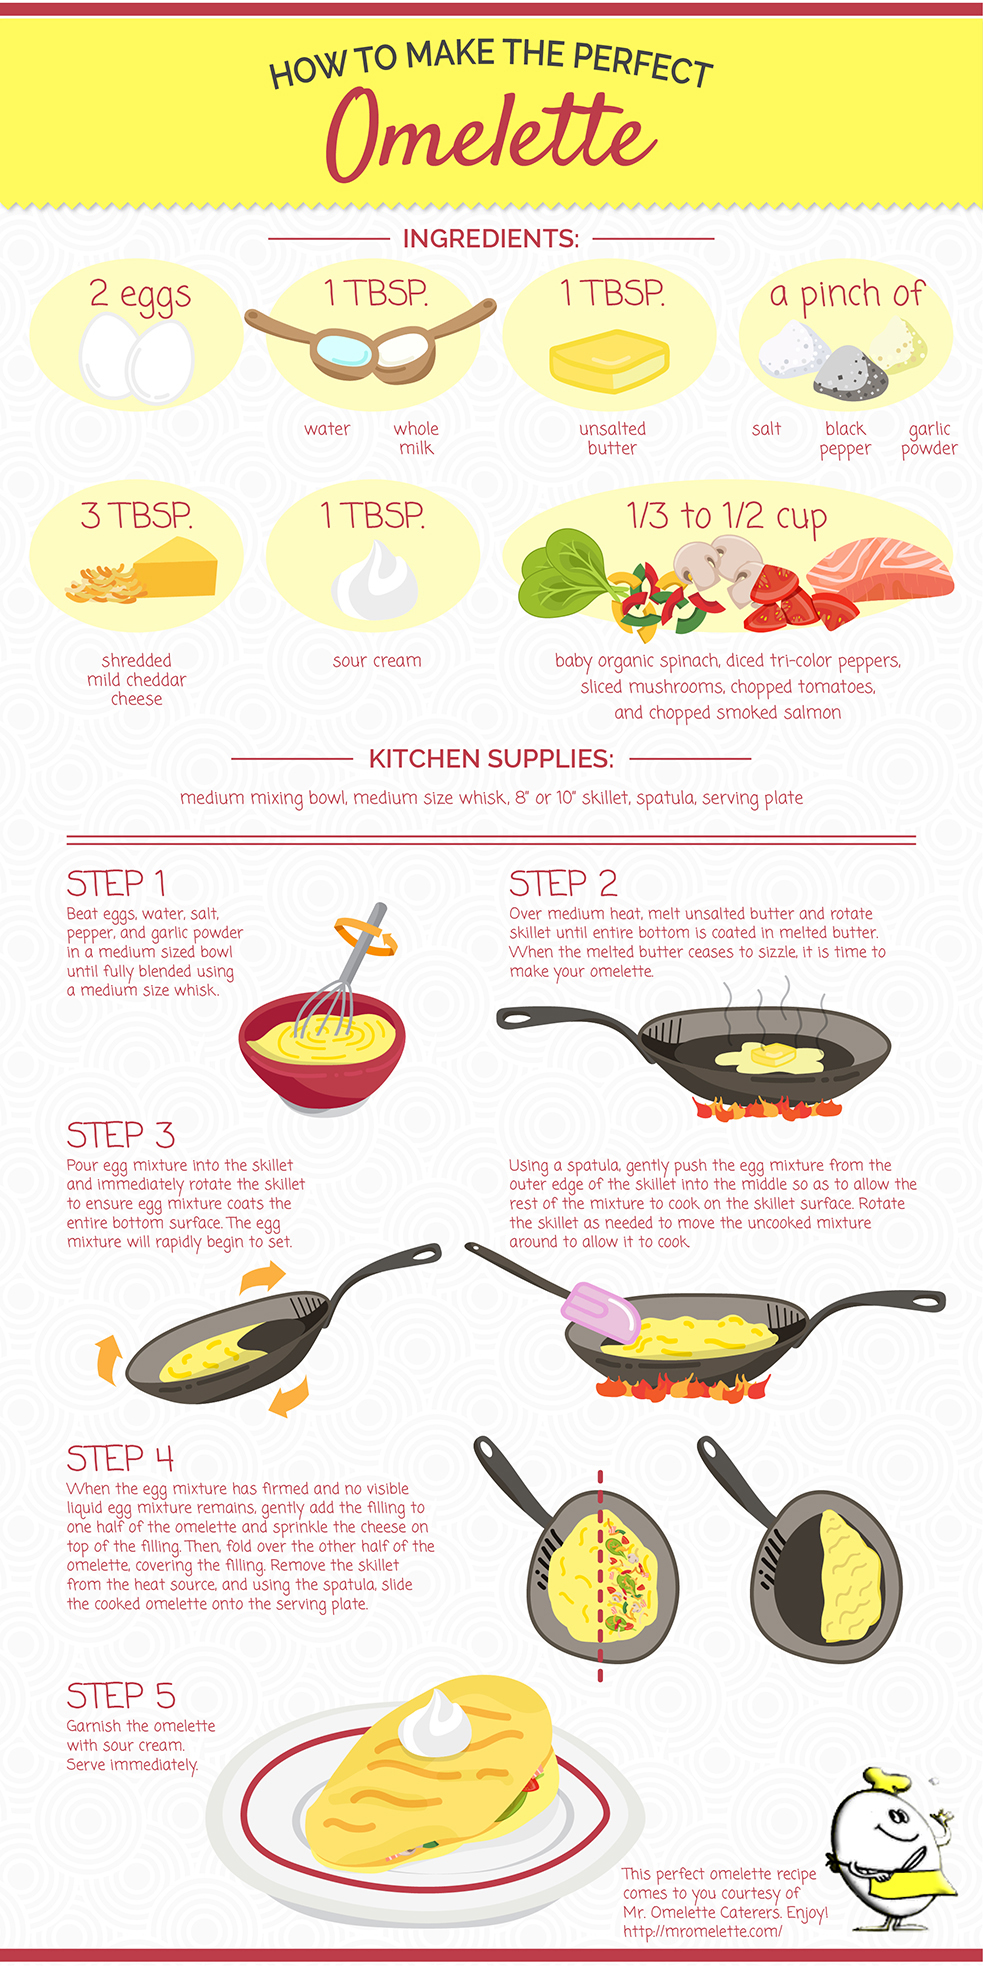 How to Make an Omelette